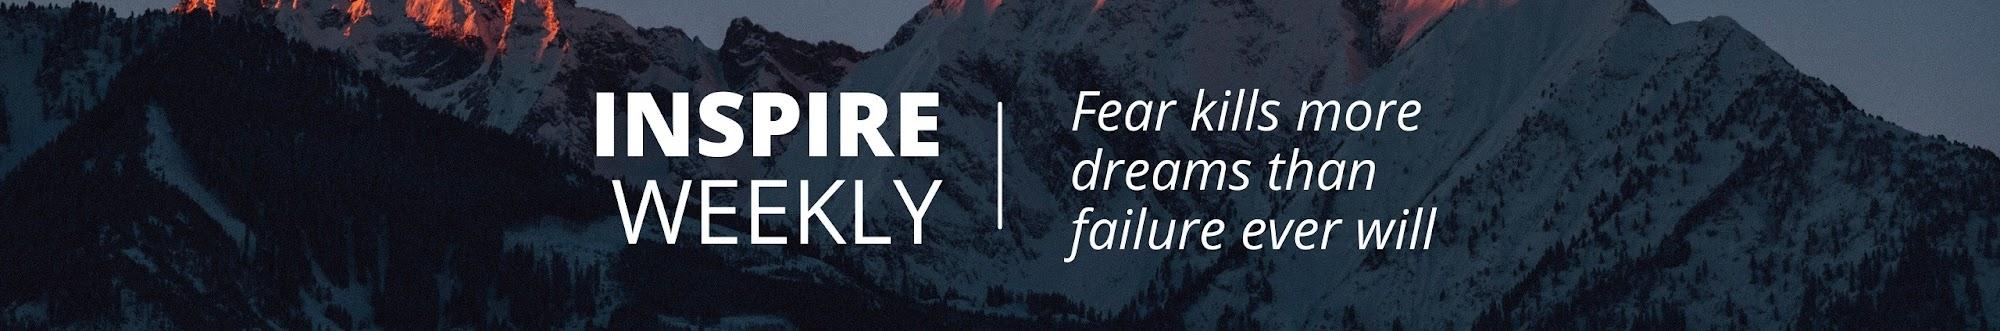 Inspire Weekly